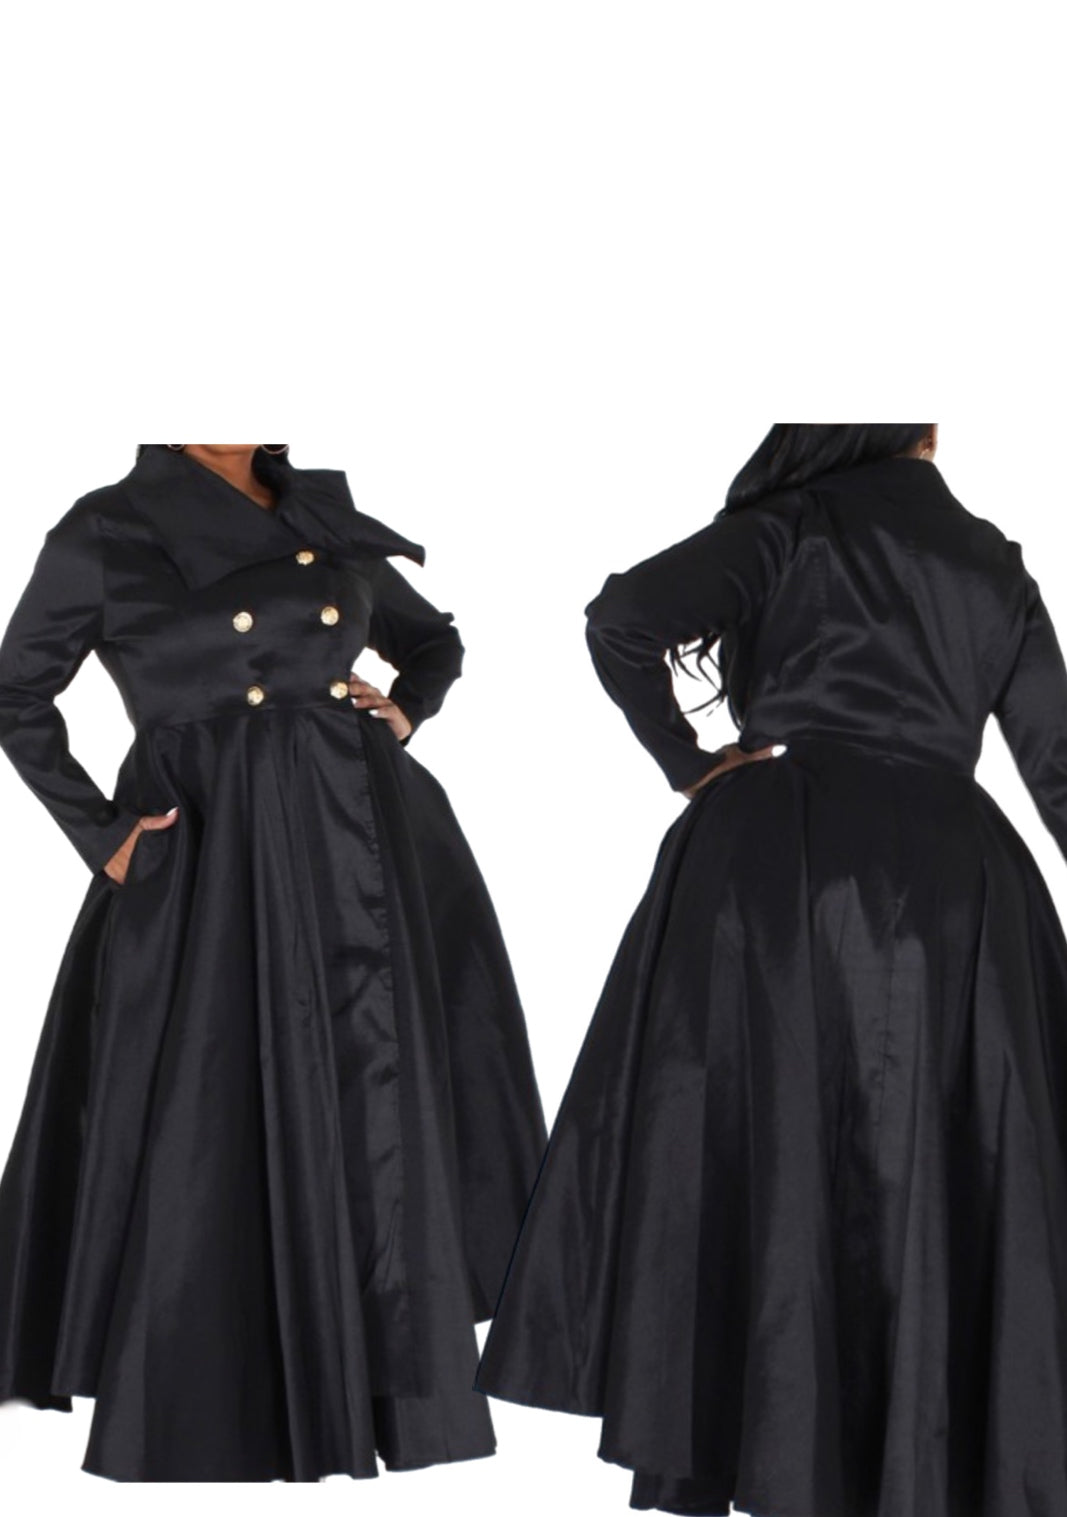 The First Lady Trench Dress Plus Size